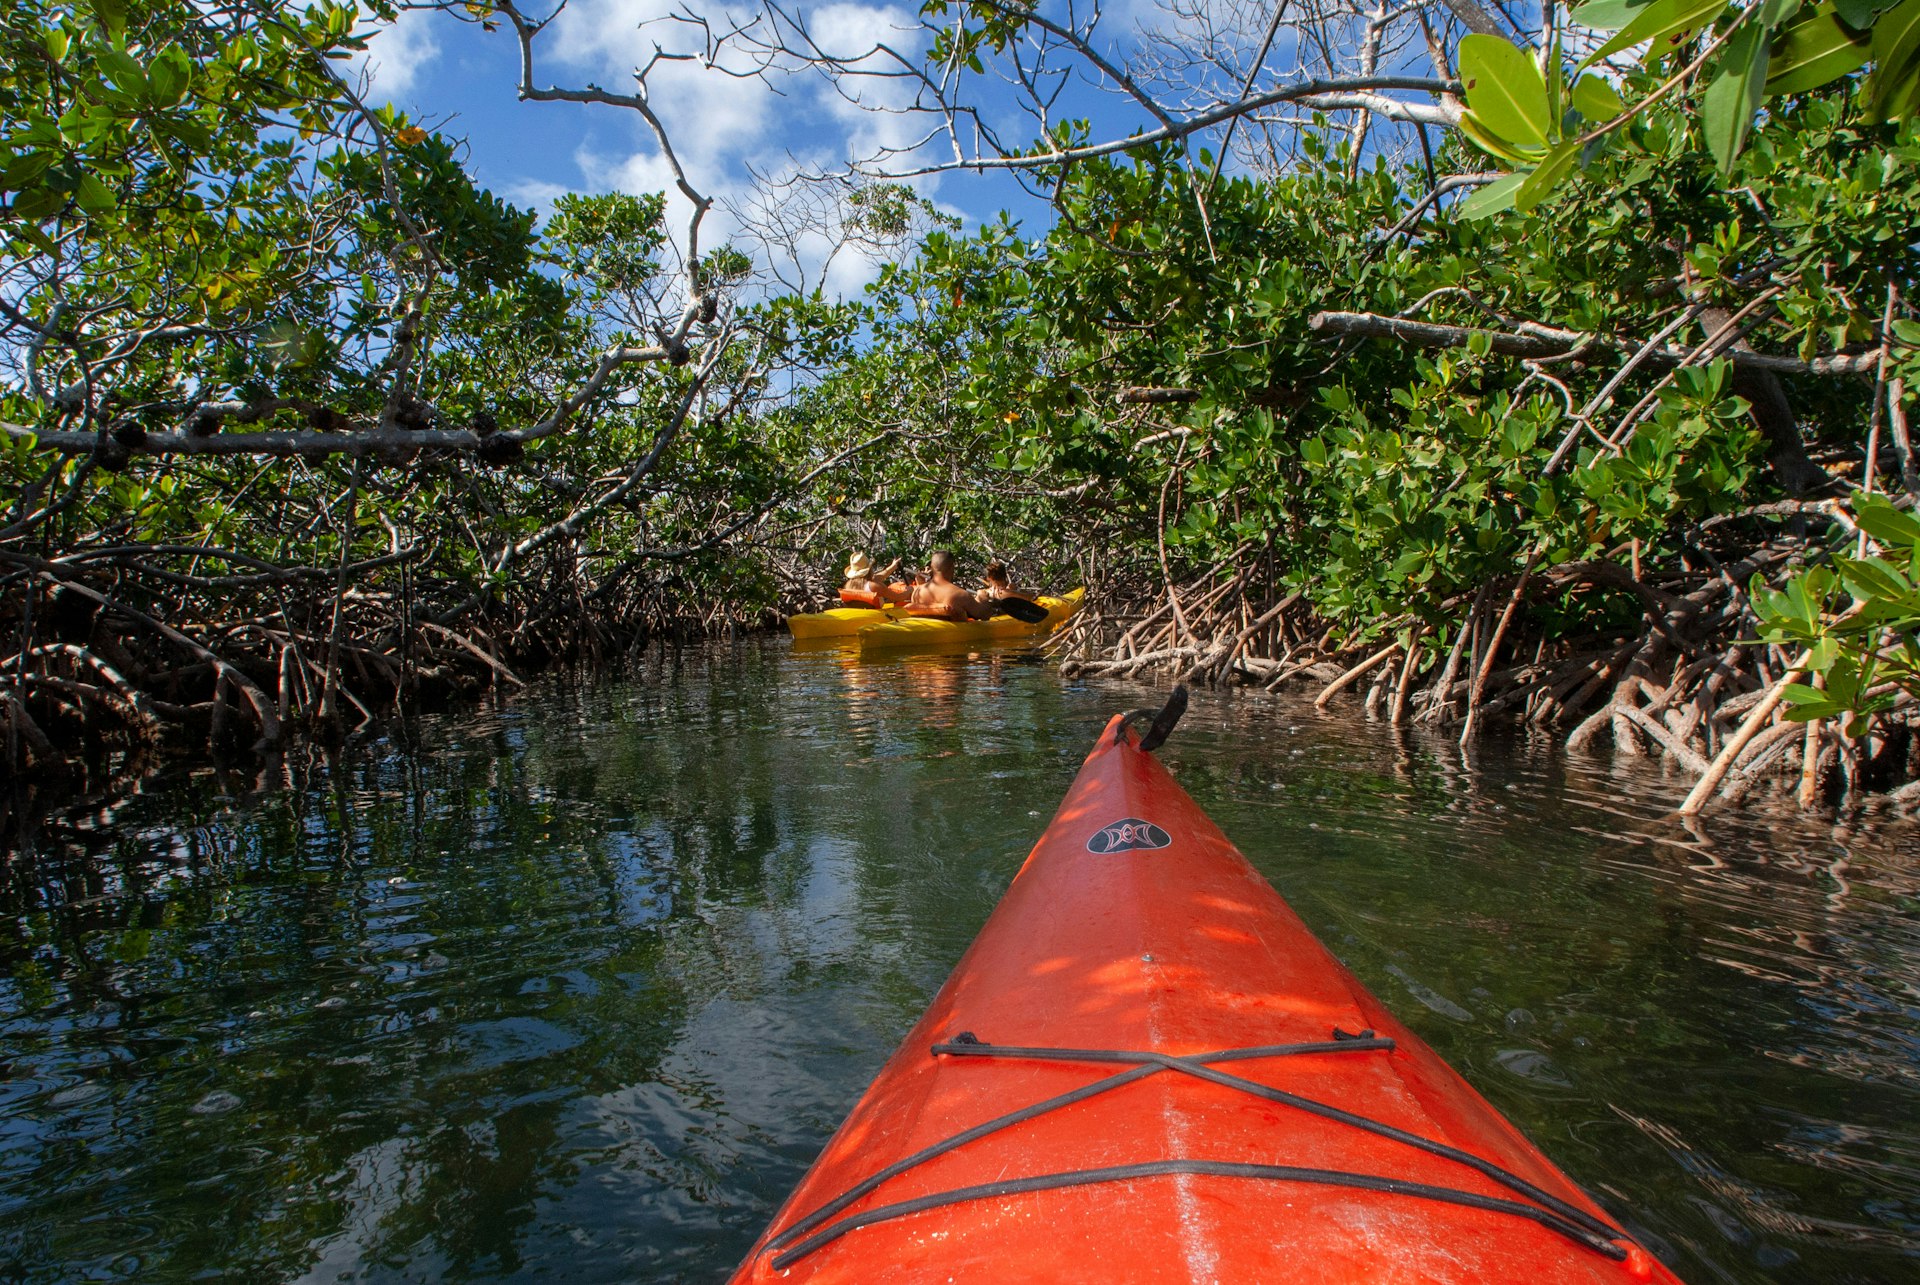 The front portion of a kayak moves through the waters of the Lucayan National Park in Grand Bahama. There are mangroves and trees flanking the waterway. 